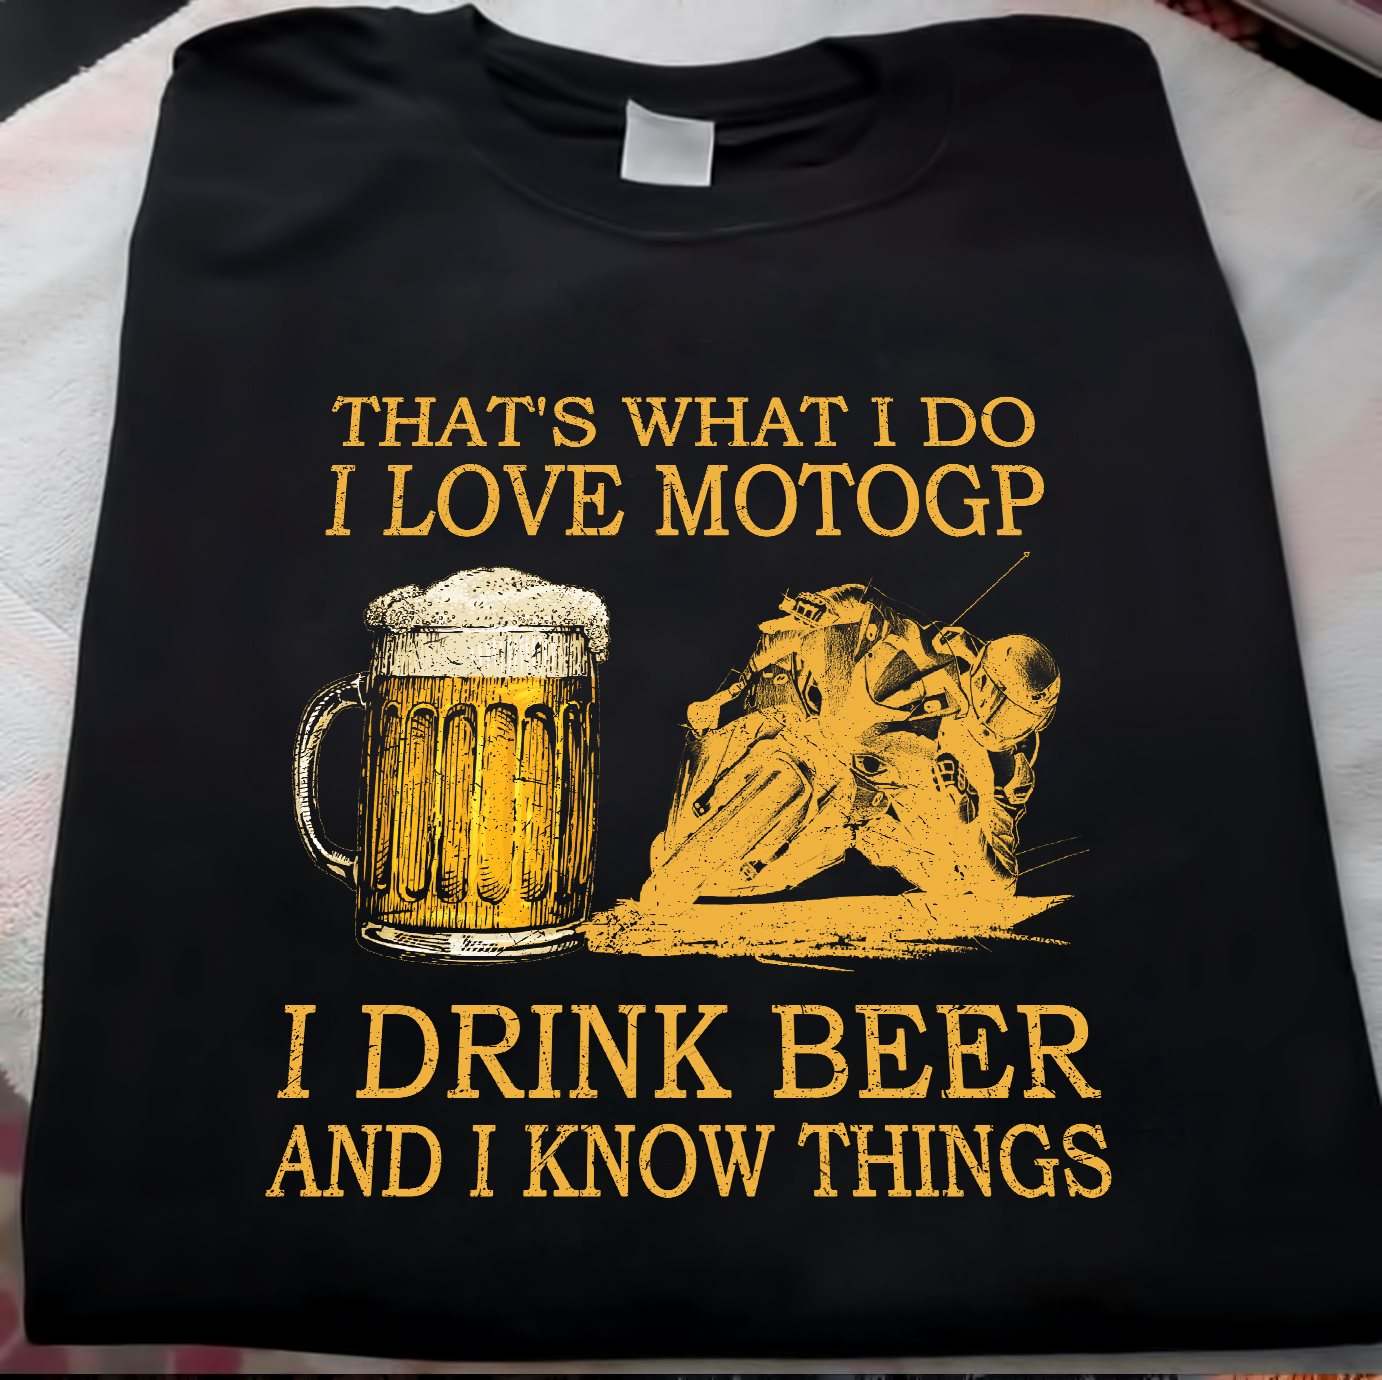 That's what I do I love motogp I drink beer and I know things - Beer lover